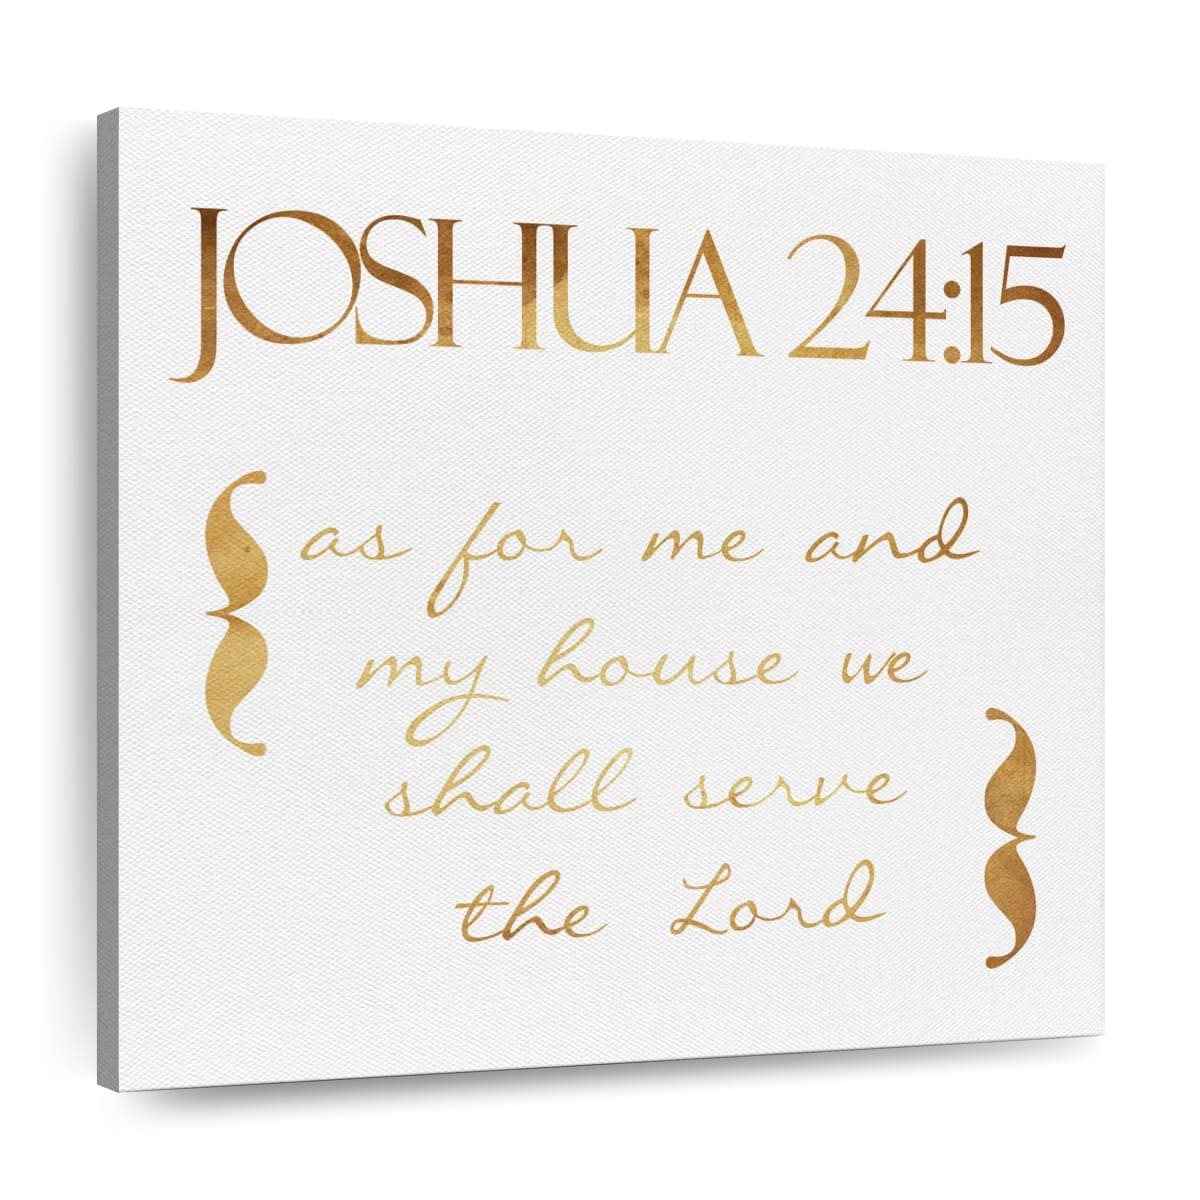 My House Square Canvas Art - Christian Wall Decor - Christian Wall Hanging